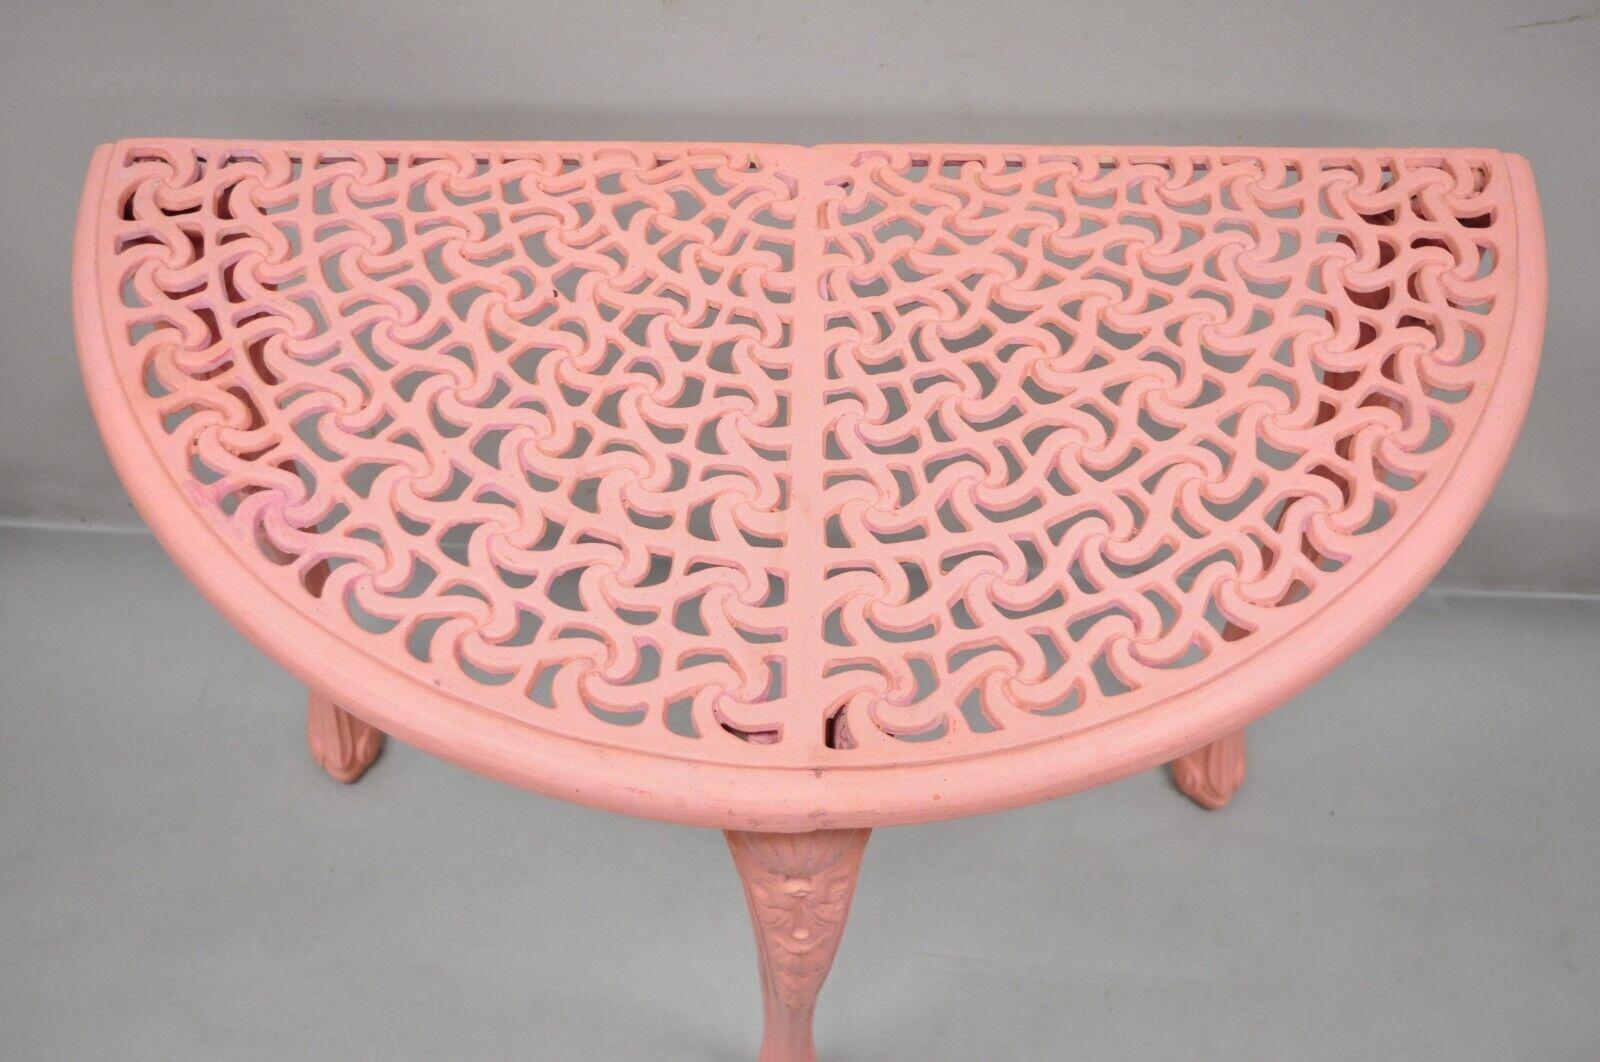 Vintage French Neoclassical style cast aluminum pink demilune console table. Item features pierced decorated top, pink painted finish, cast aluminum construction, very nice vintage item, great style and form. Circa mid-20th century.
Measurements: